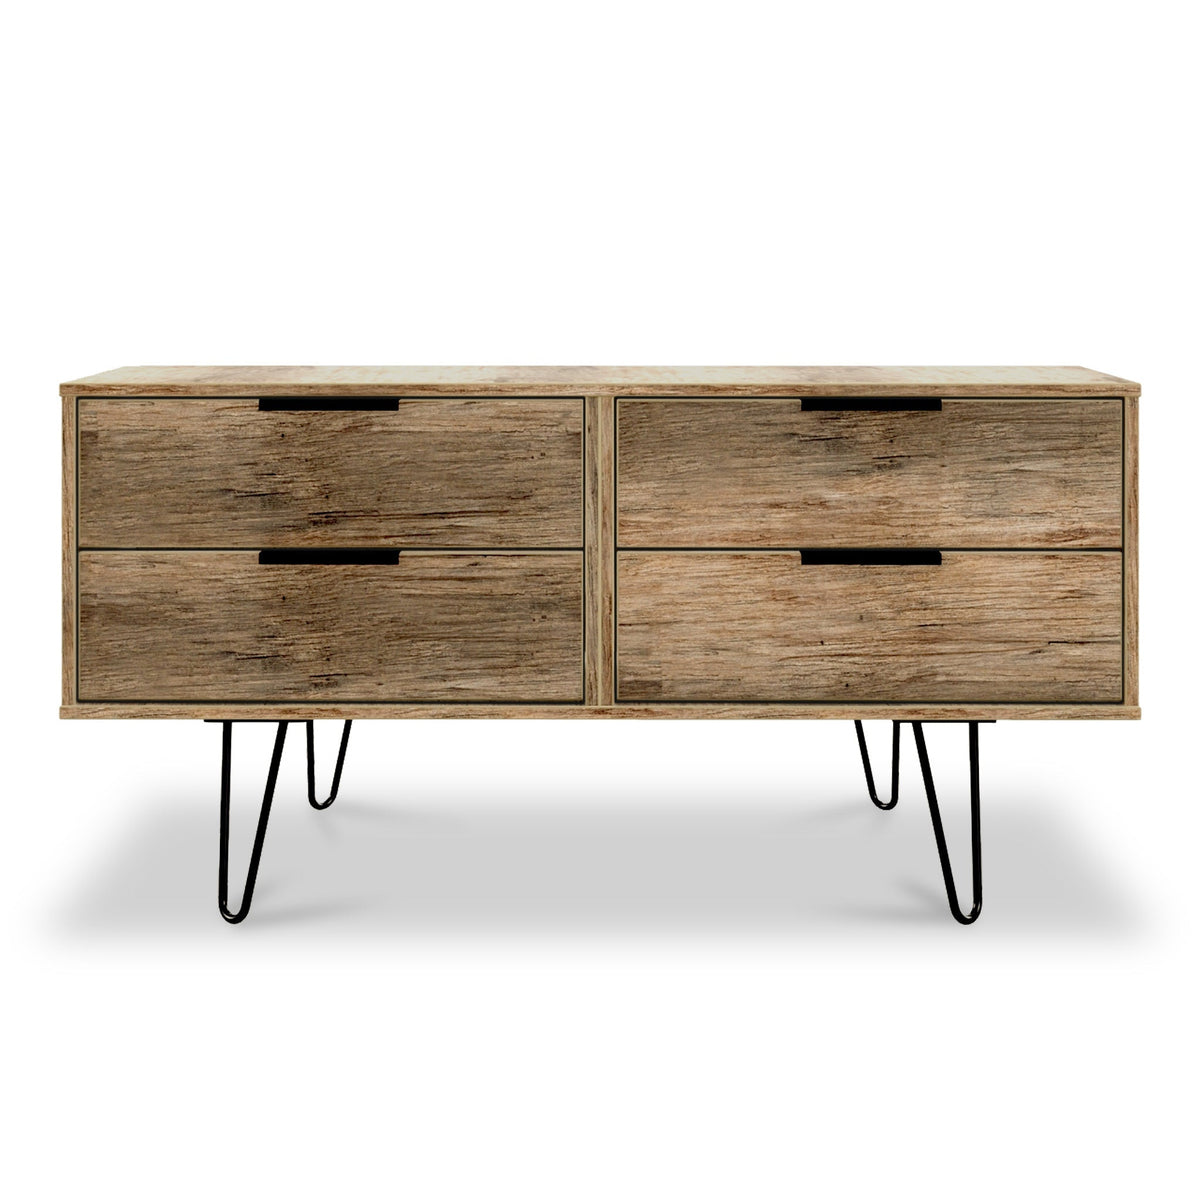 Moreno Rustic Oak Low Storage Unit with Black Hairpin Legs from Roseland Furniture